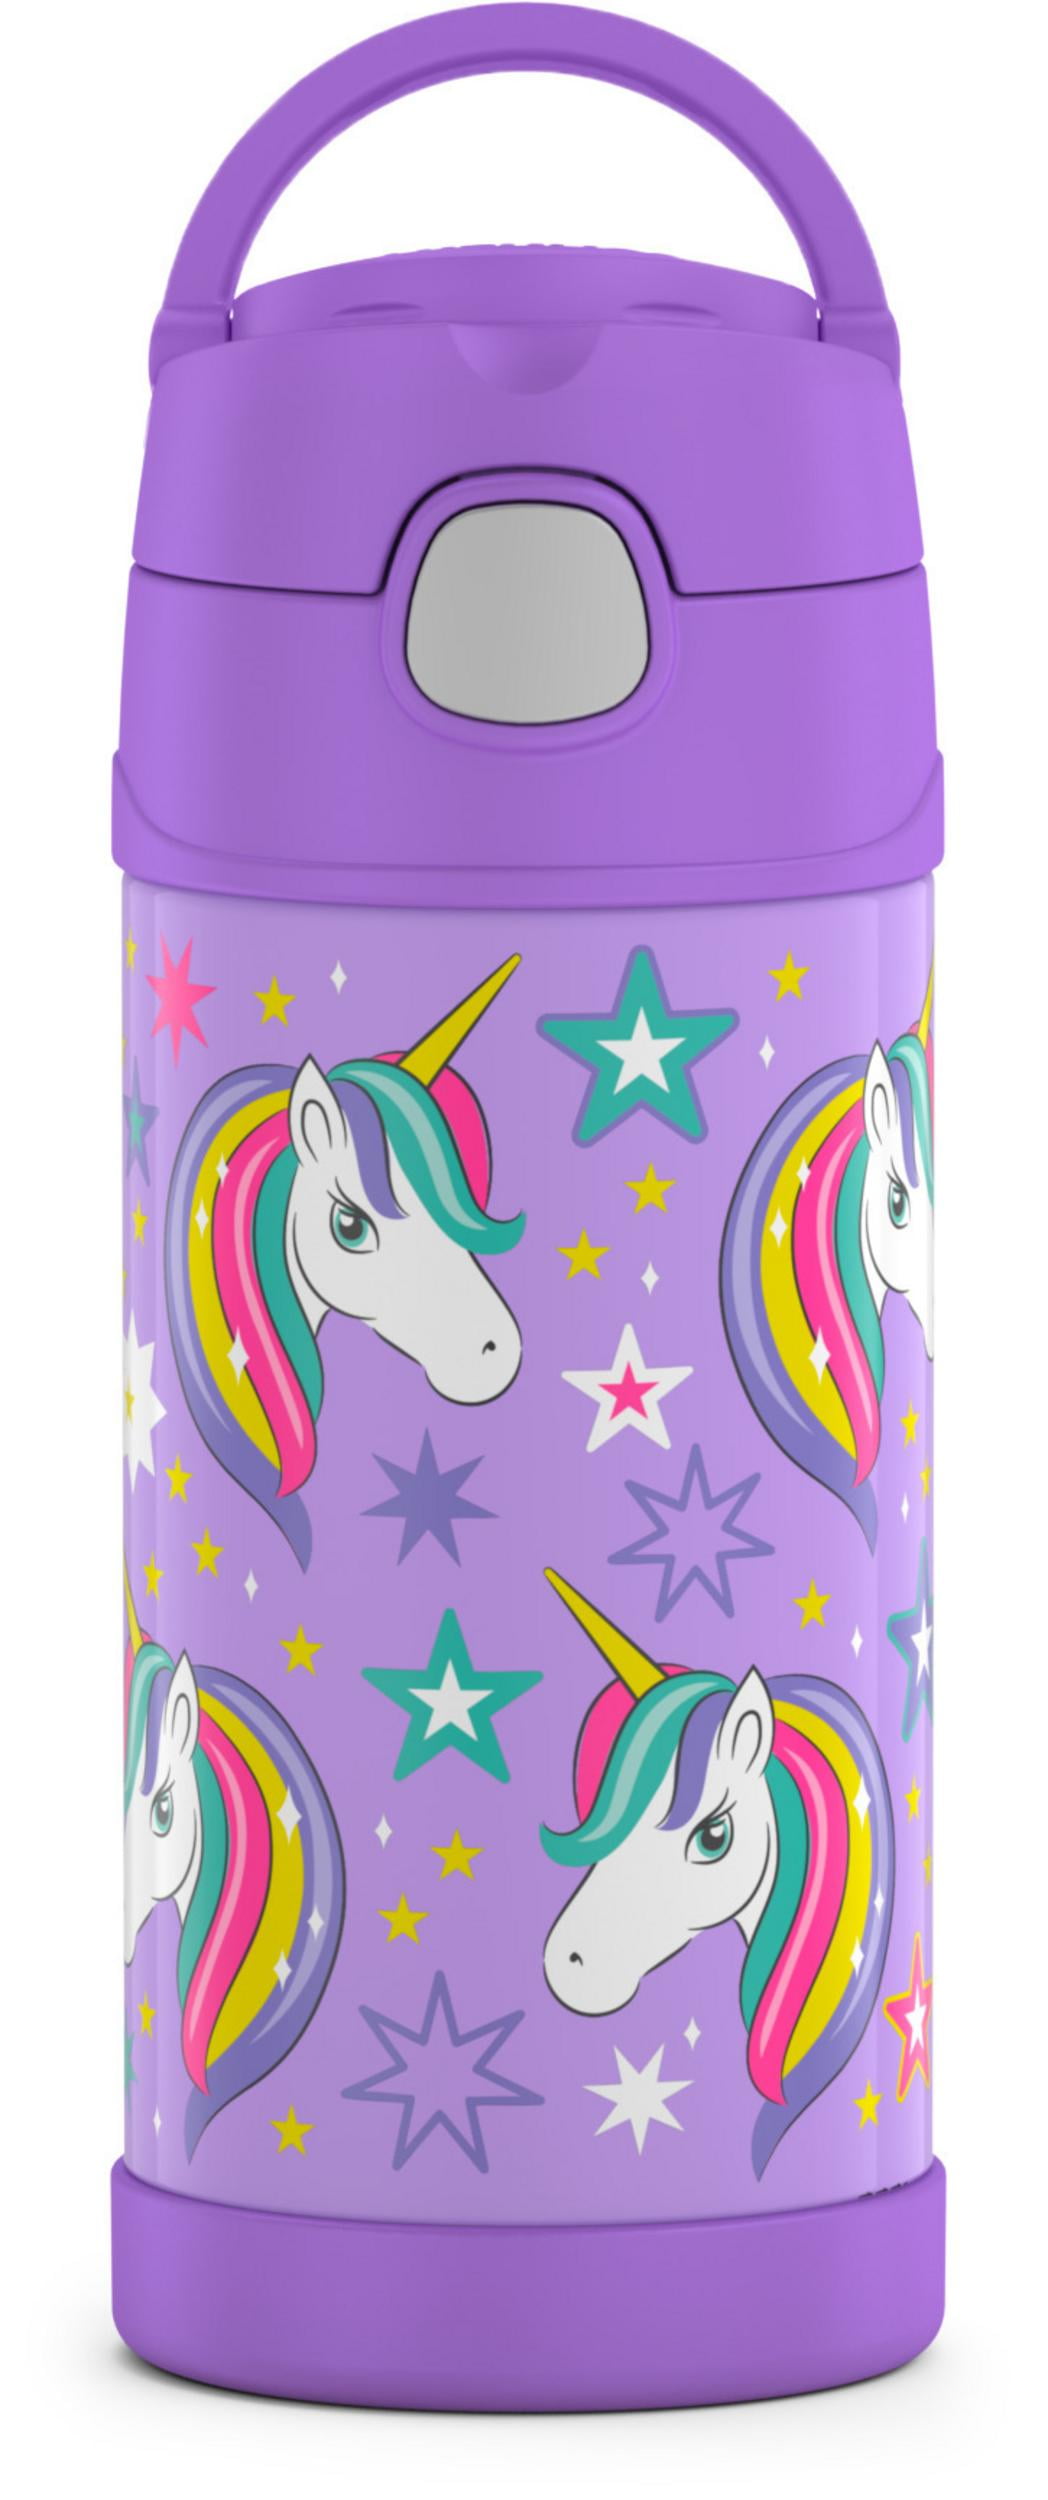 Iron °FLASK Kids Water Bottle - 14 oz, Straw Lid, 20 Name Stickers, Silicone Boot, Vacuum Insulated Stainless Steel, Double Walled Tumbler Travel